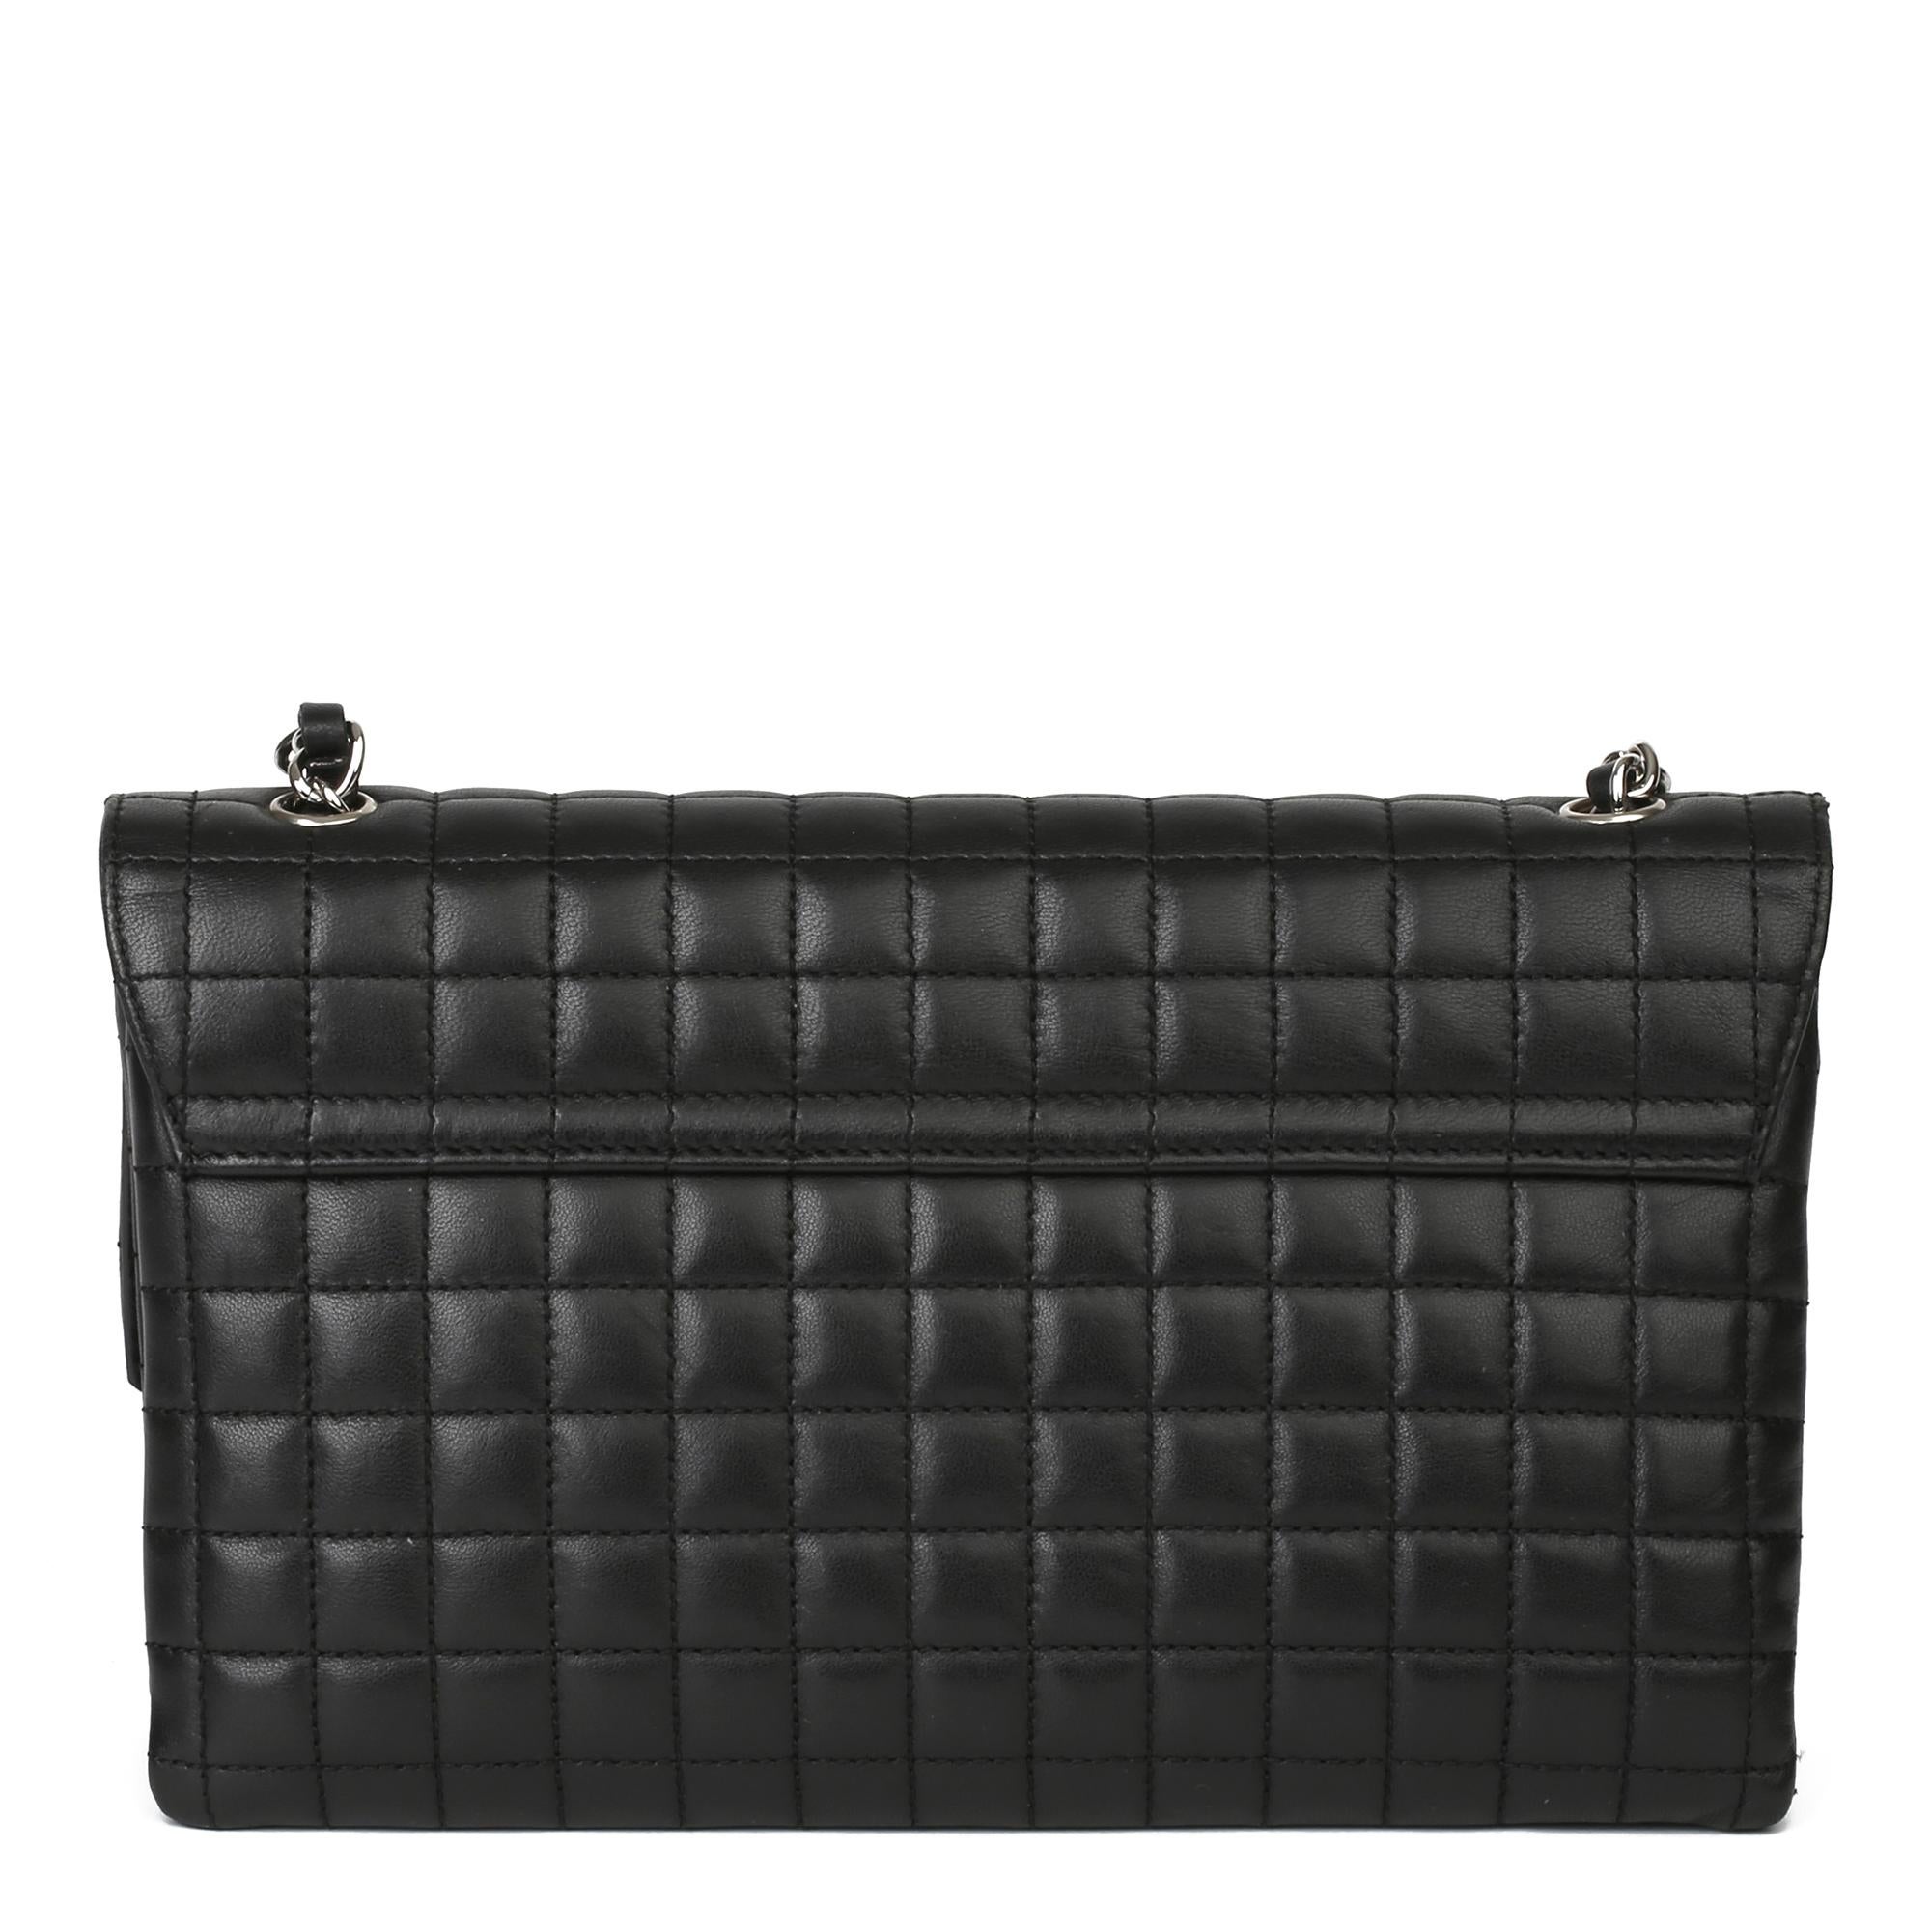 Women's 2005 Chanel Black Chocolate Bar Quilted Lambskin & Patent Leather No. 5 Camellia